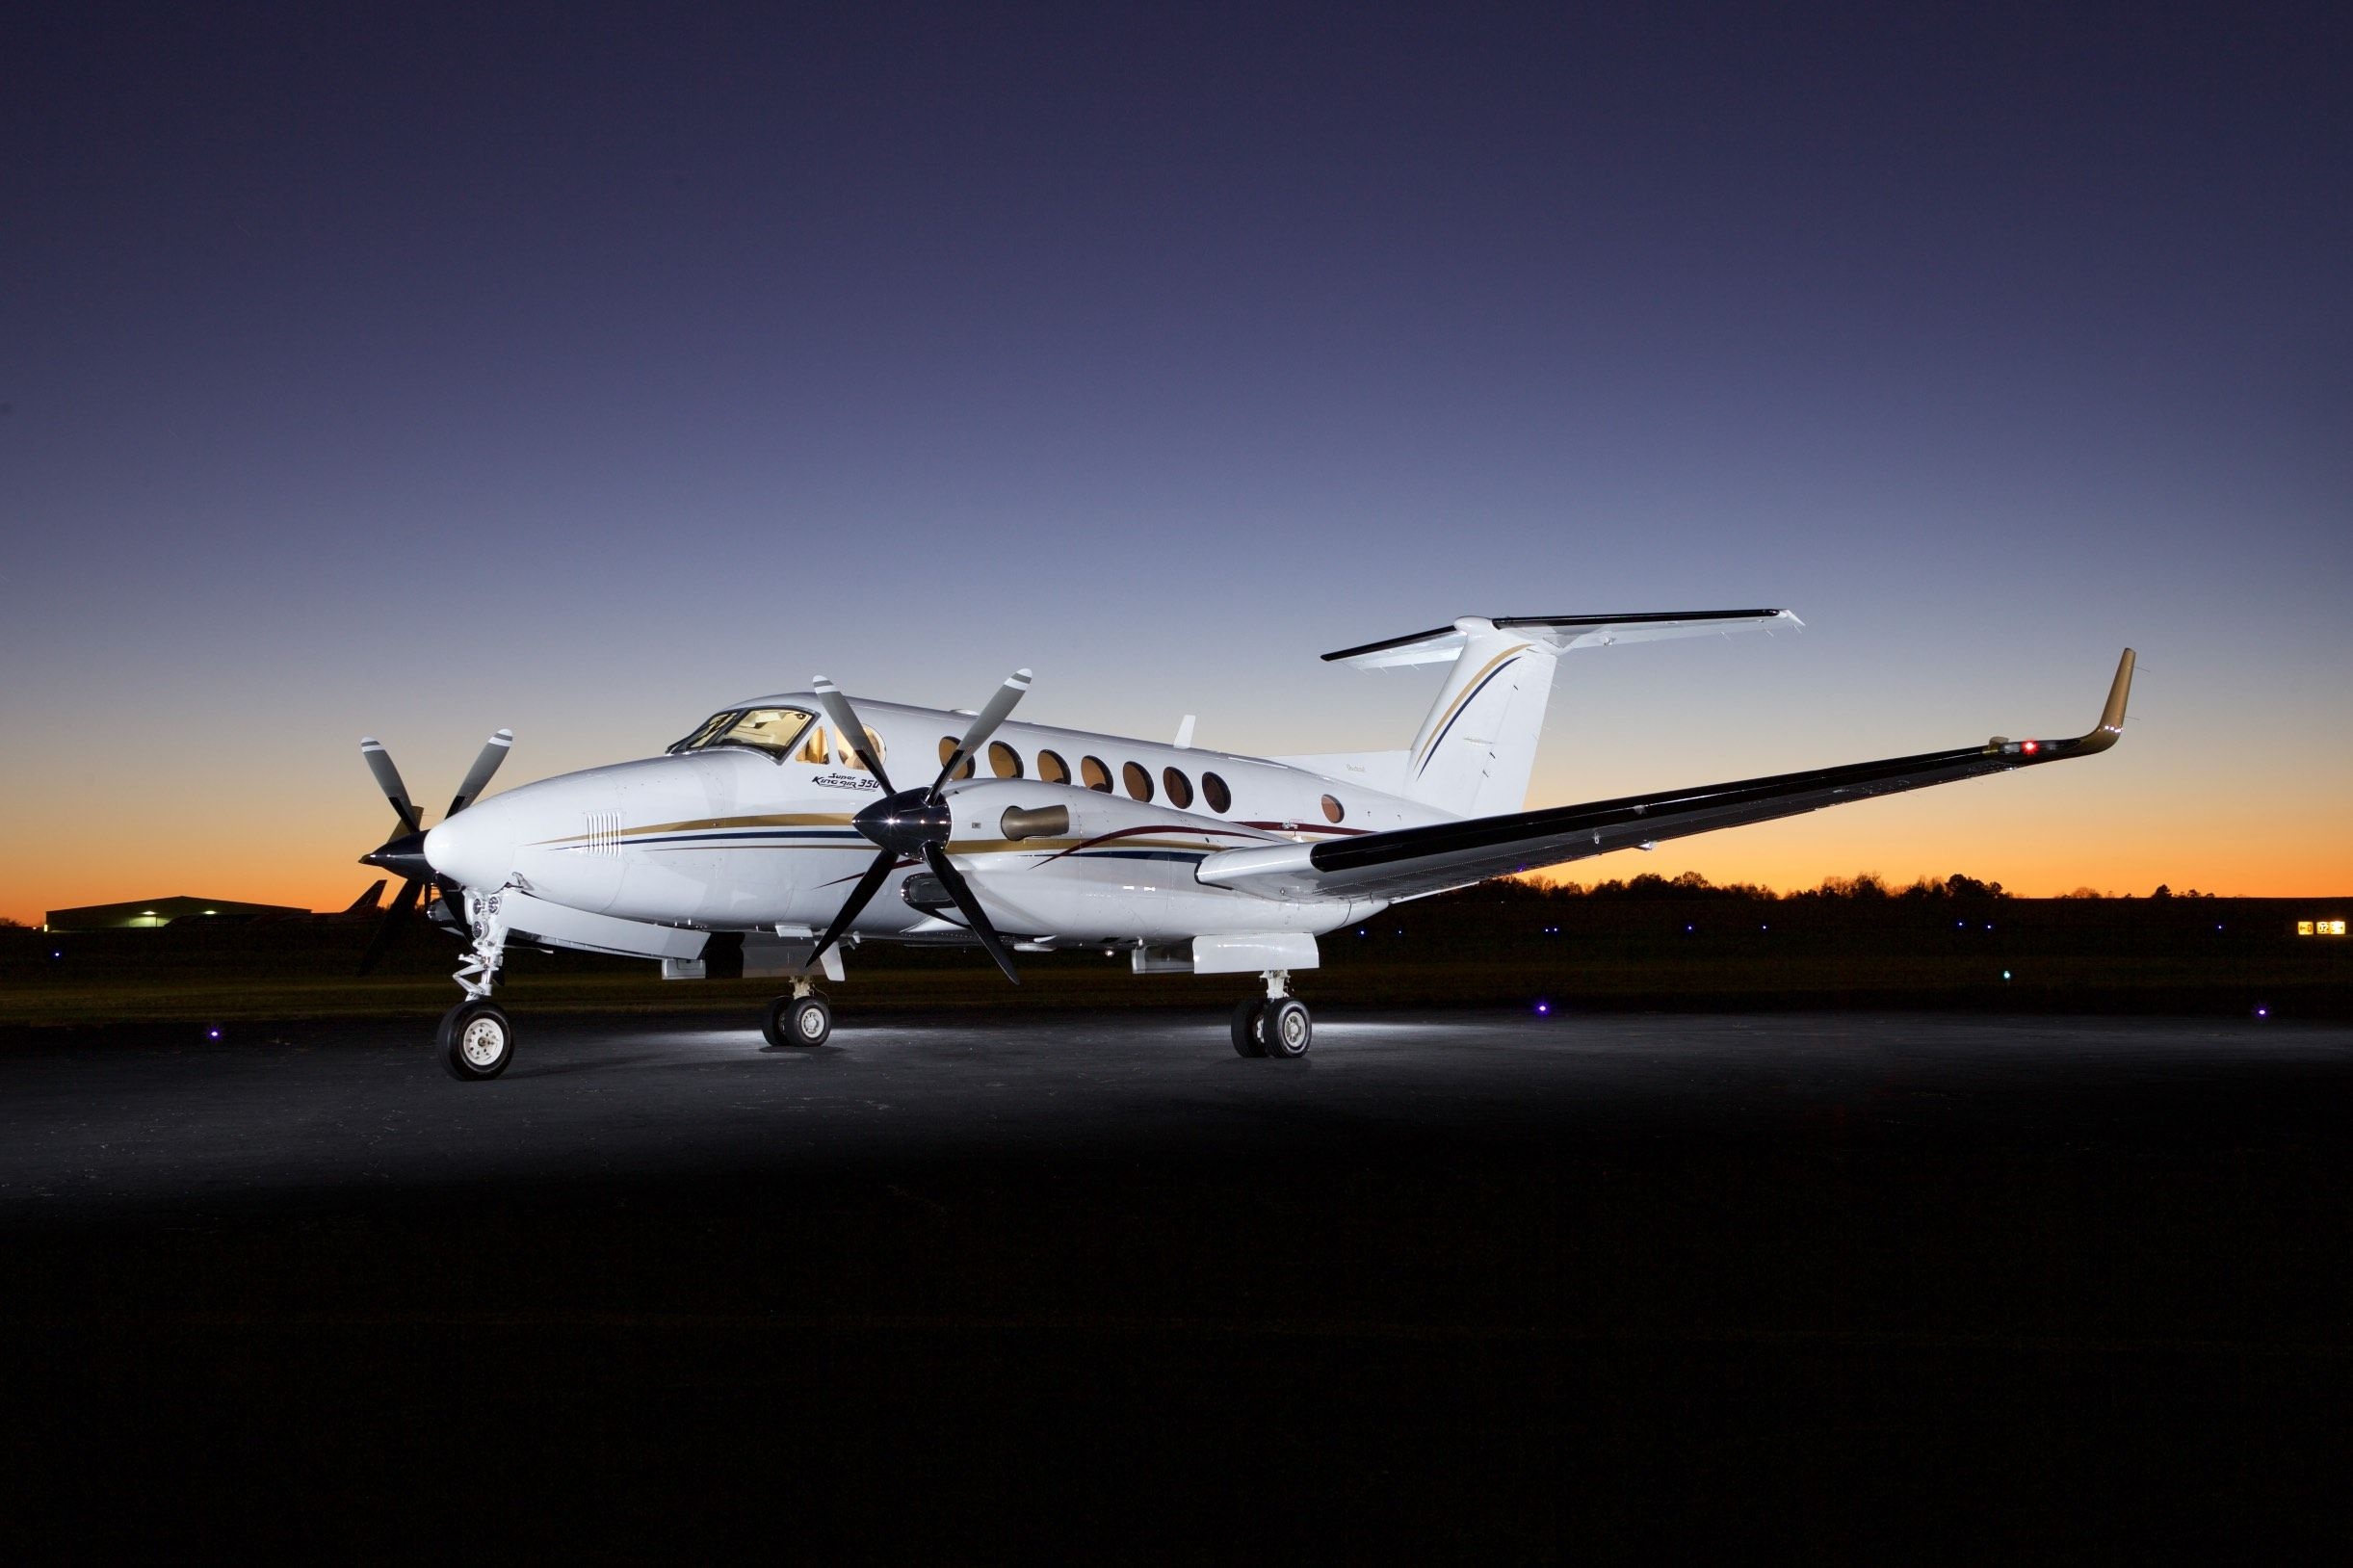 Beechcraft King Air, Aircraft for sale, Private jet market, Air travel investment, 2450x1630 HD Desktop